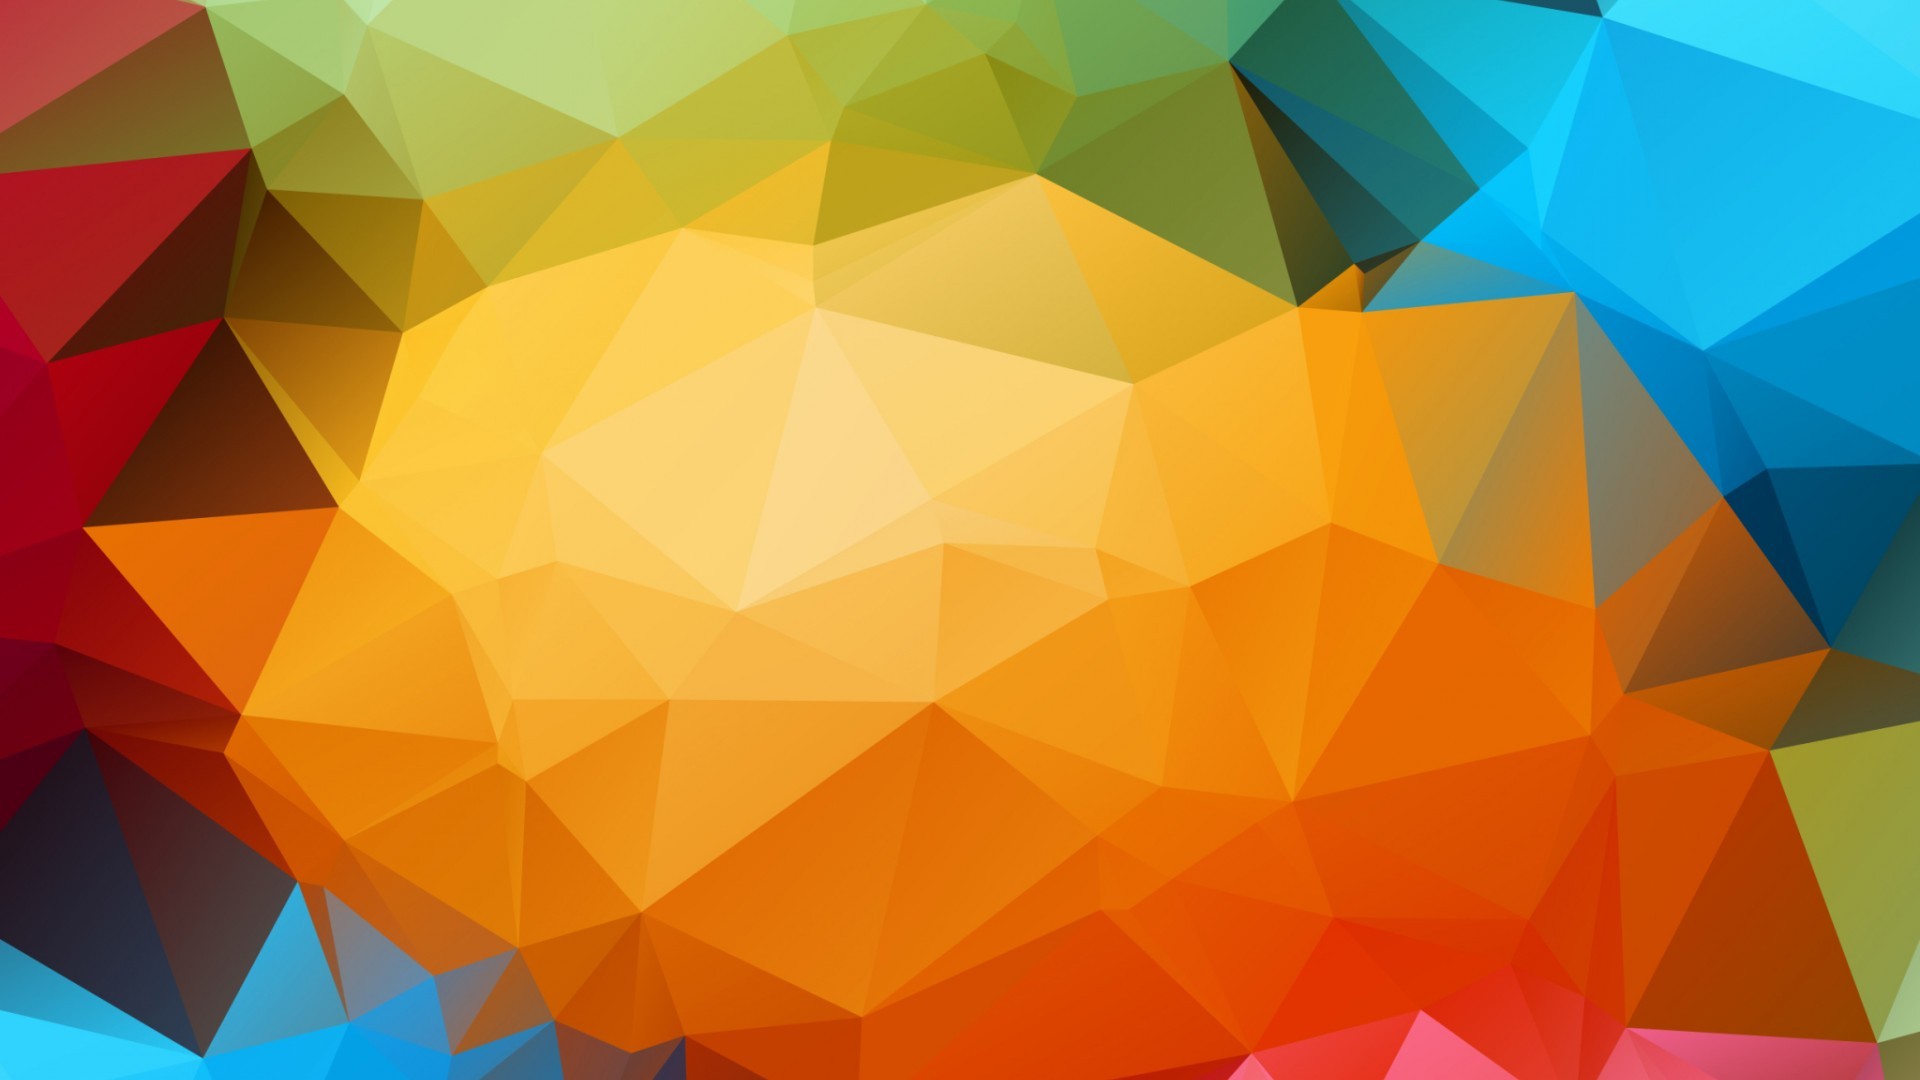 Low Poly Colorful Triangle Abstract Digital Art Wallpaper 127832